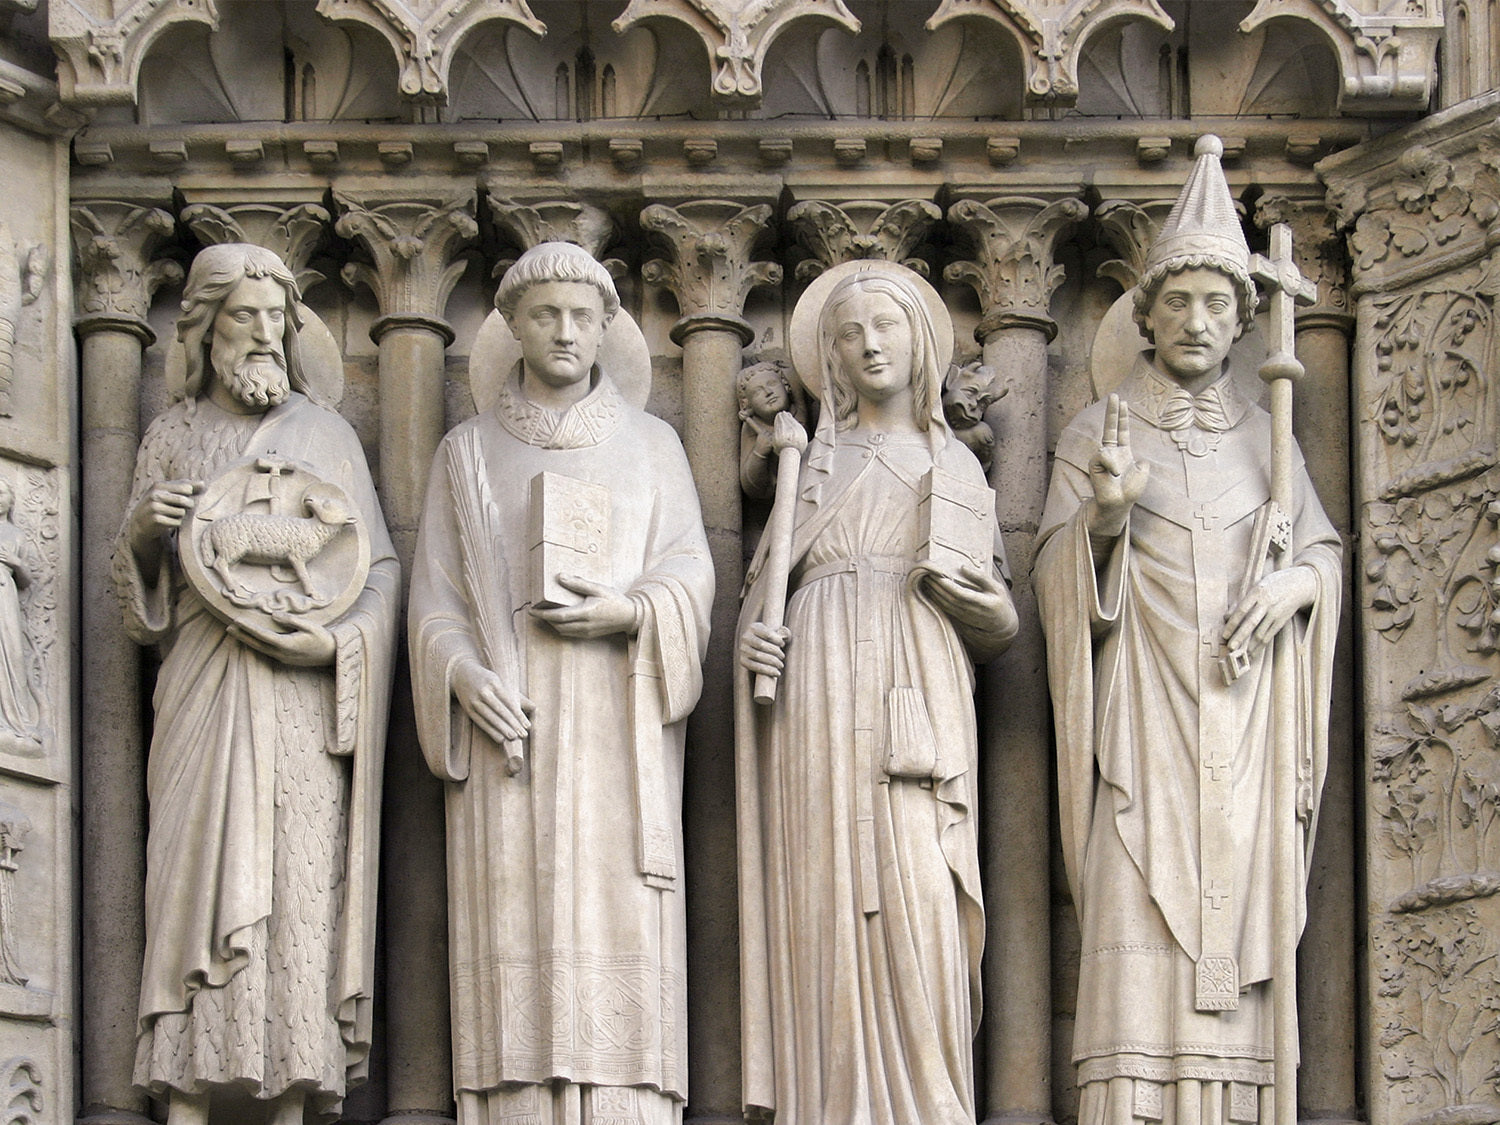 Why do we pray to the saints?